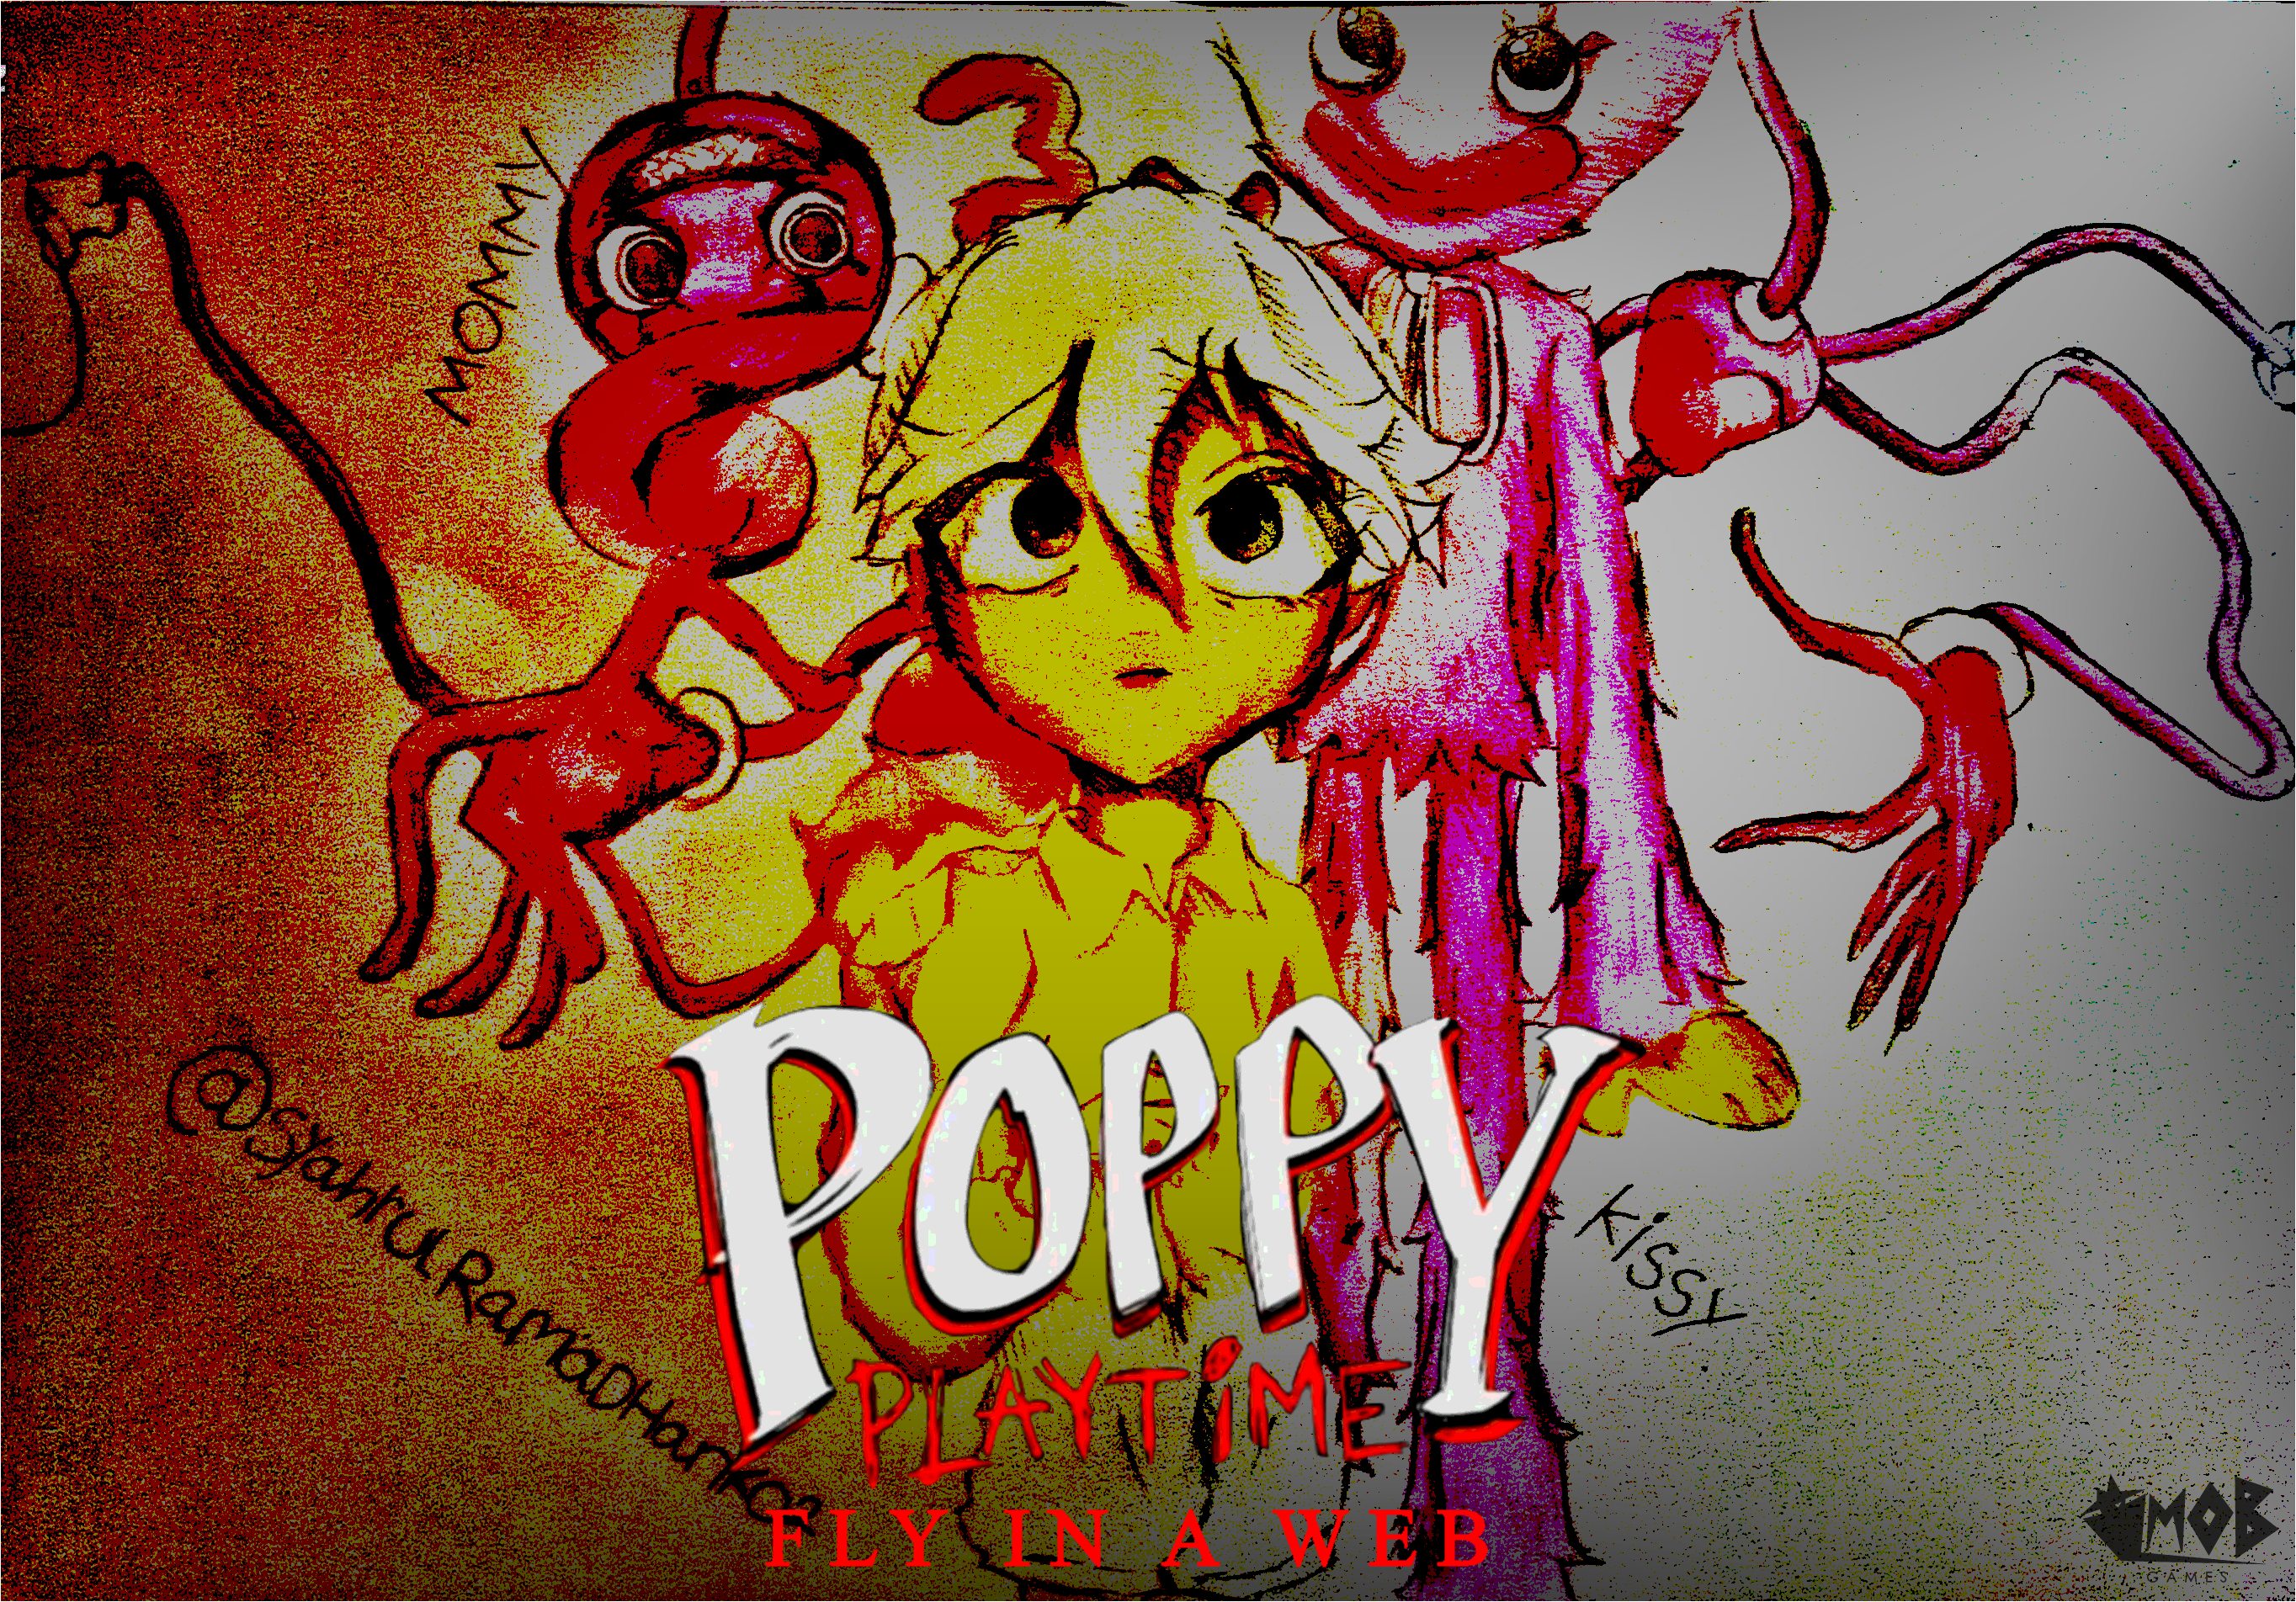 The player  Poppy Playtime: Chapter 2 by danihell-lima on DeviantArt